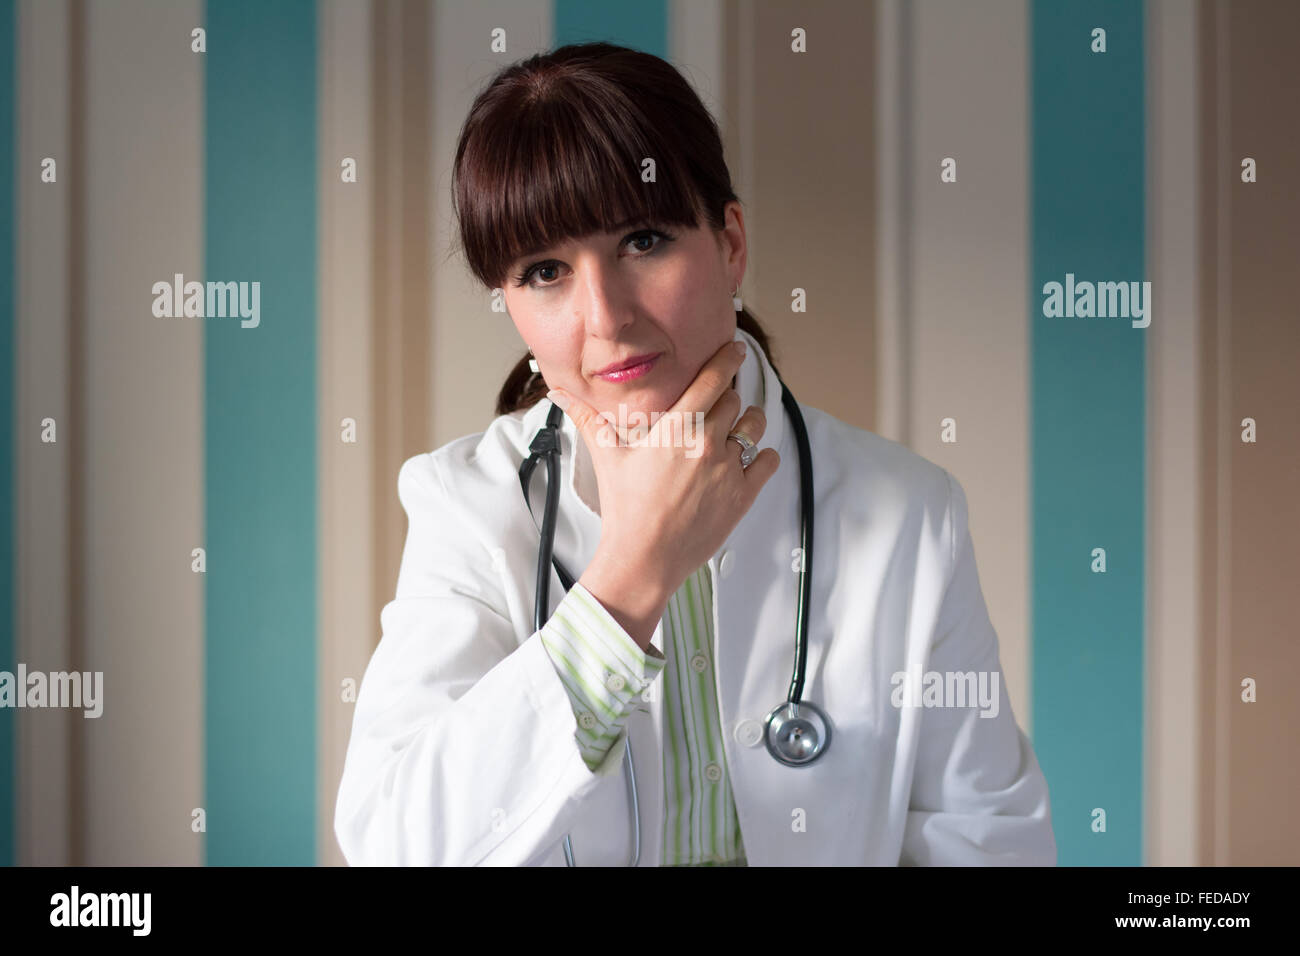 Female brunette doctor with bangs posing for the camera wearing scrubs and stethoscope Stock Photo